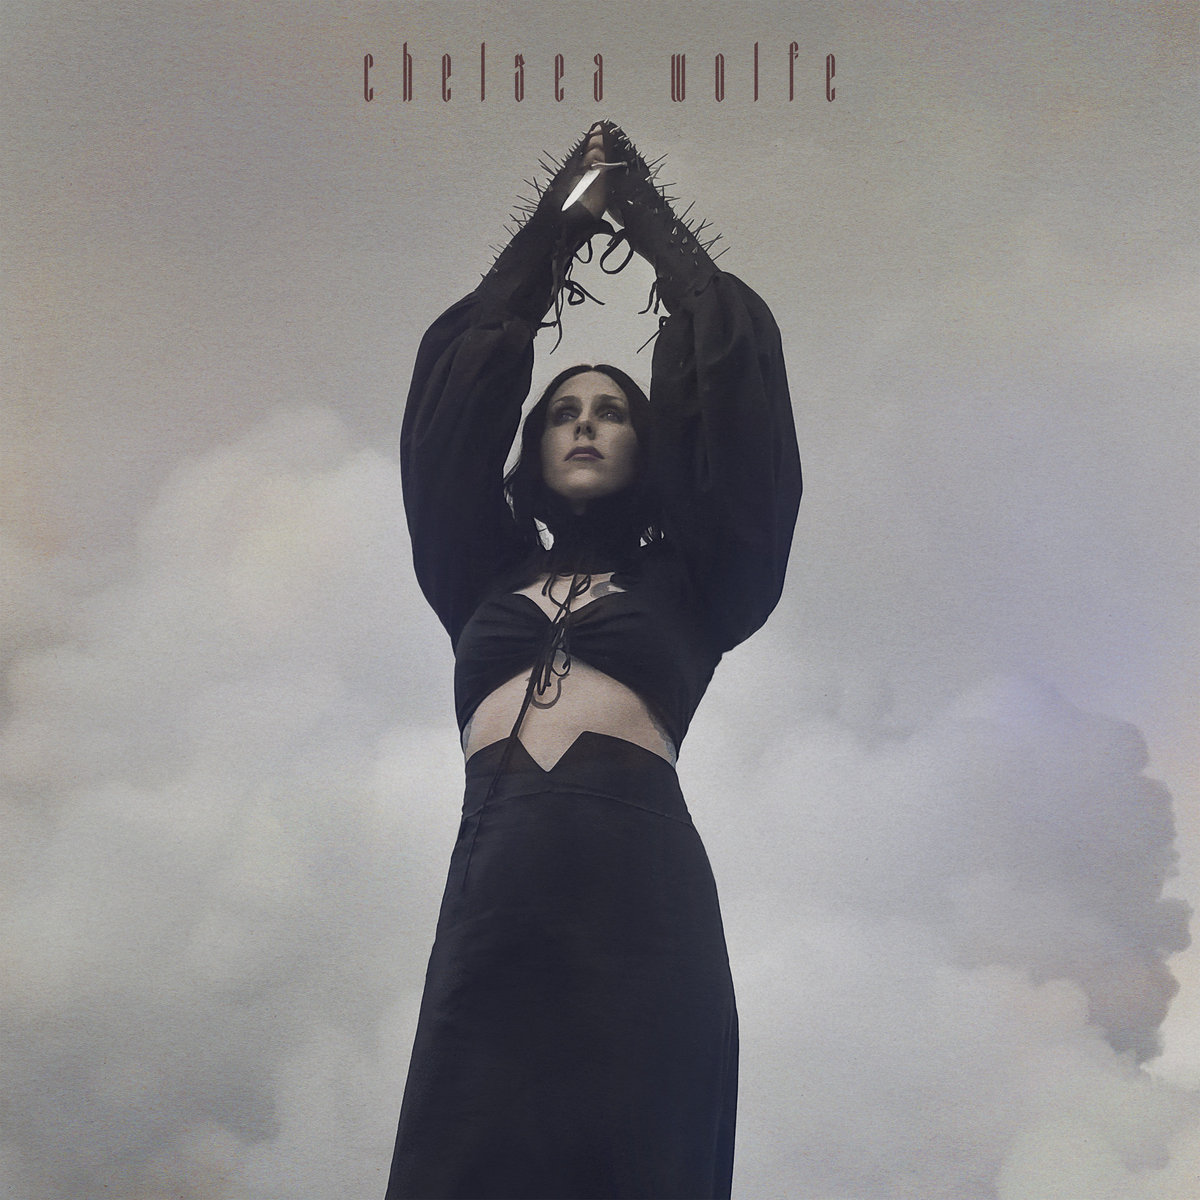 Chelsea Wolfe - Birth of Violence (LP; 2019)